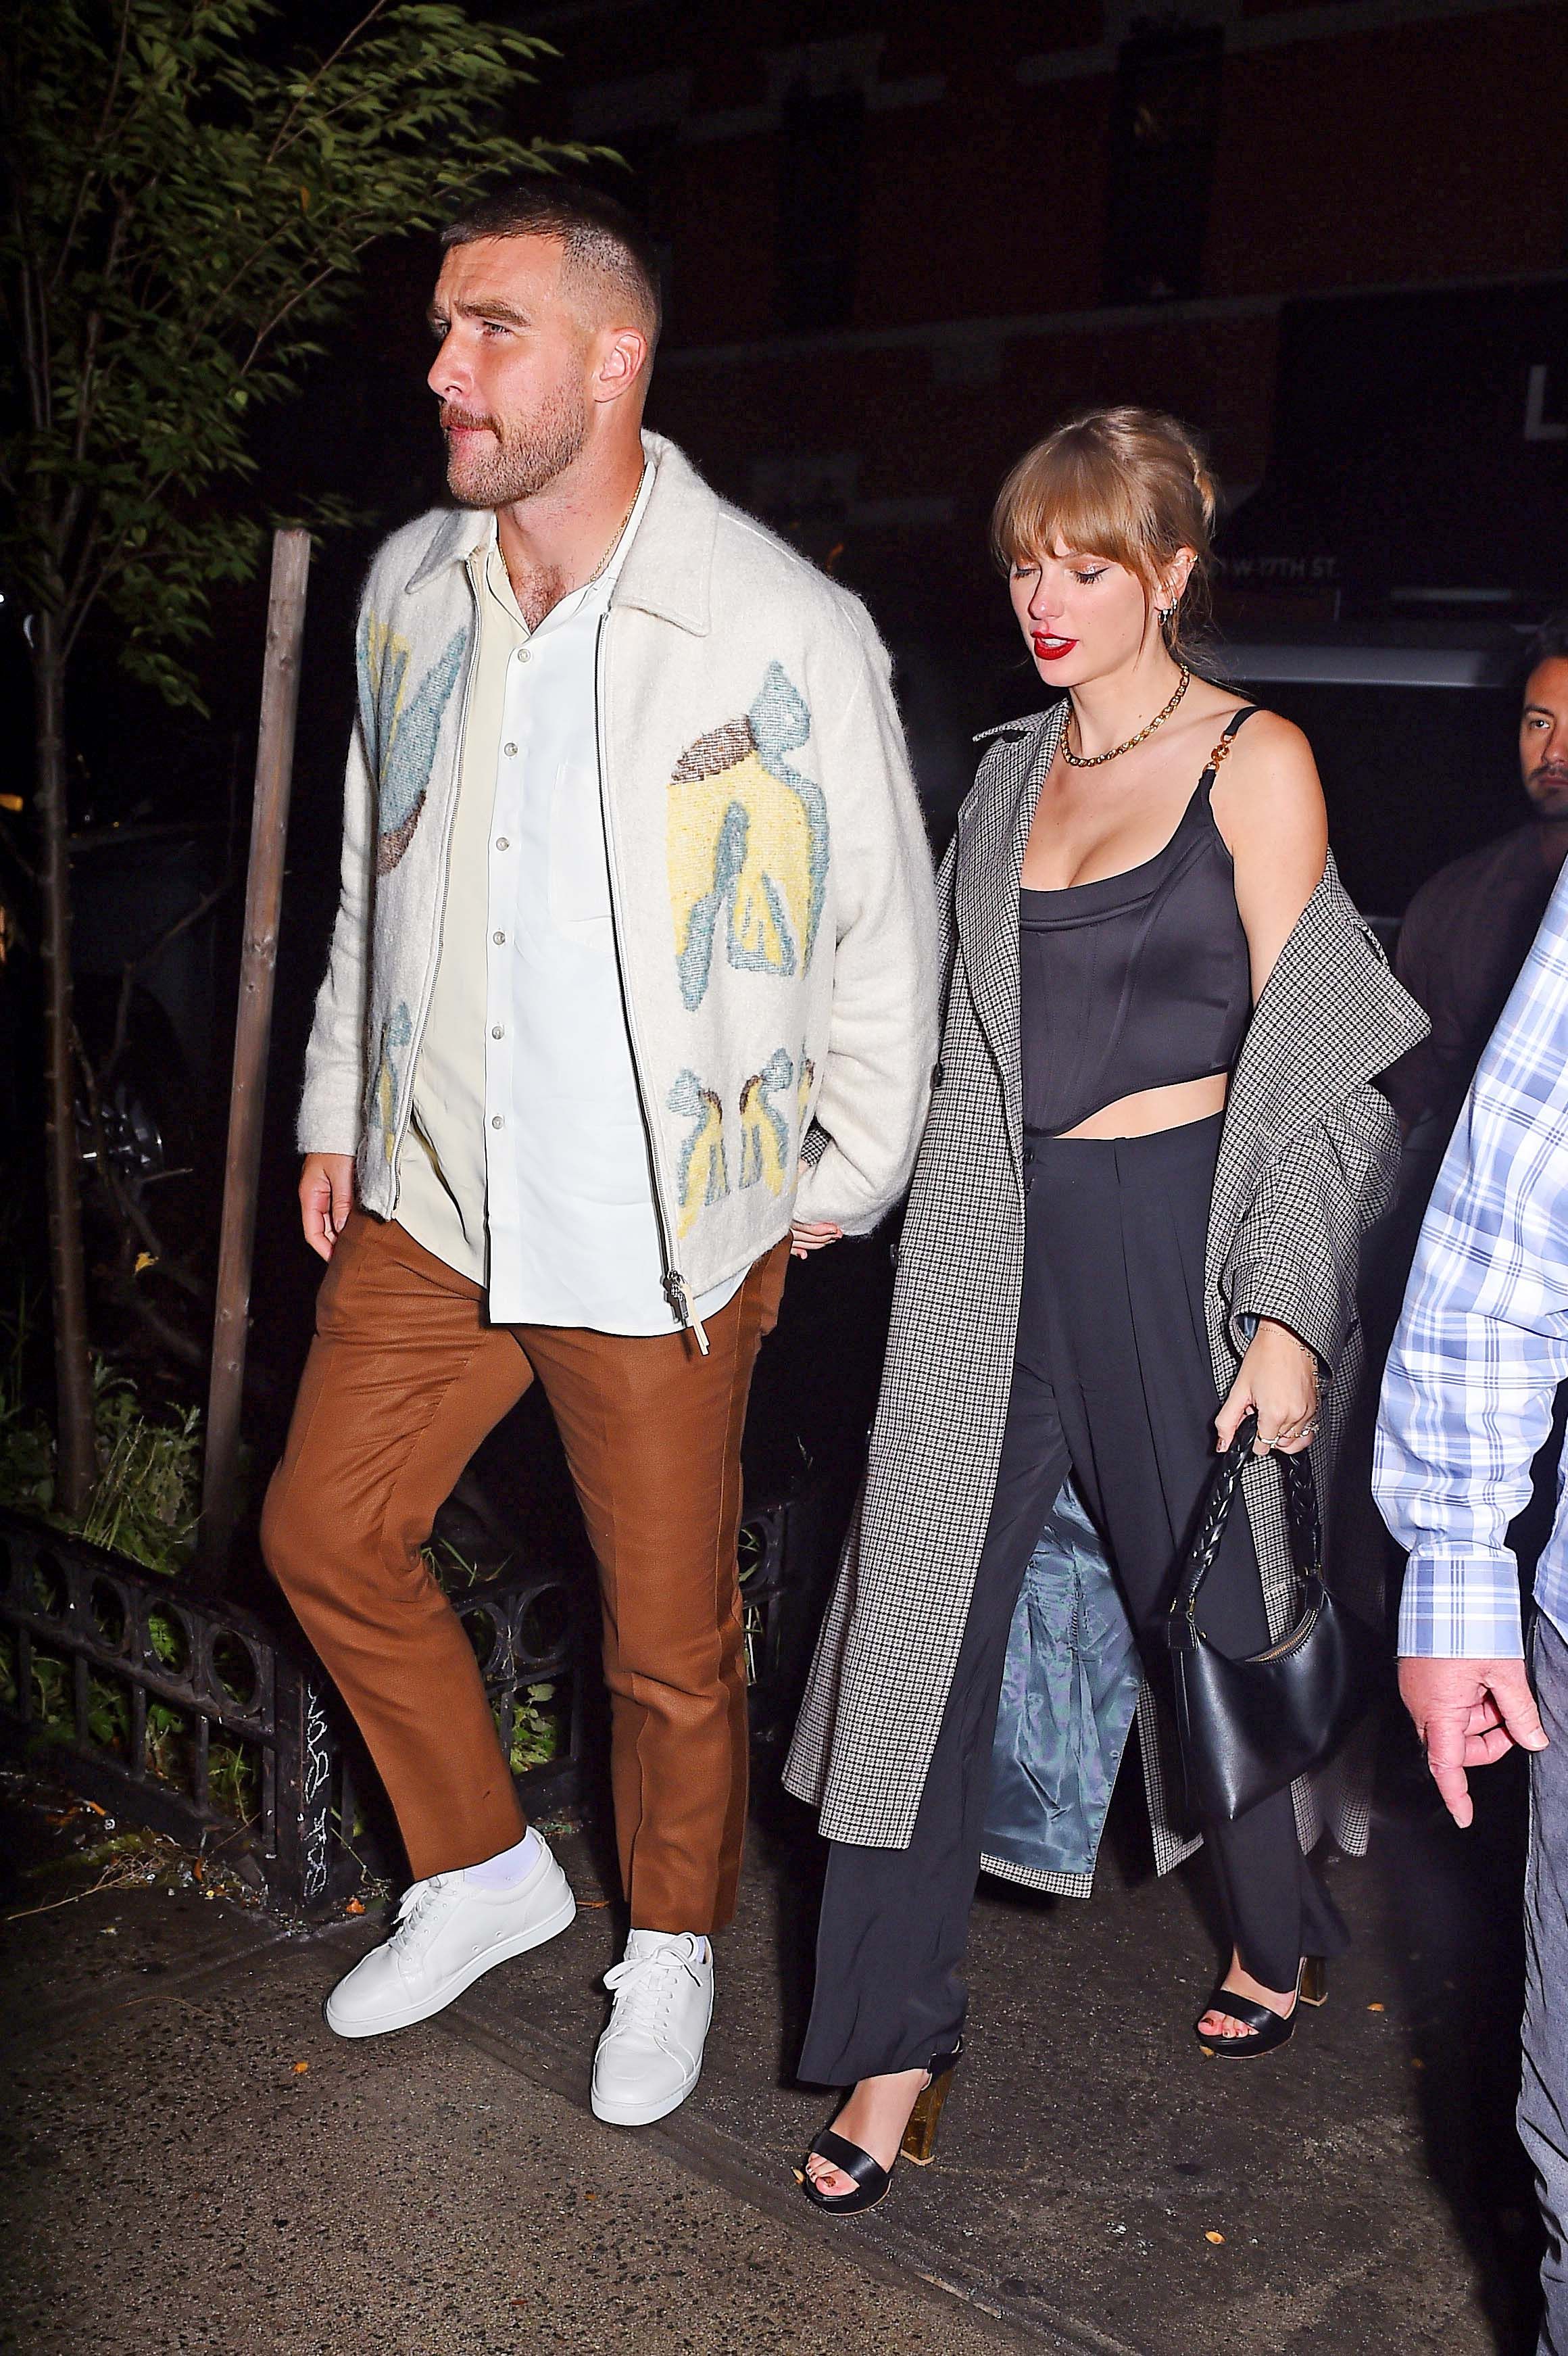 Taylor Swift's in Louboutin Shoes at 'Saturday Night Live' After